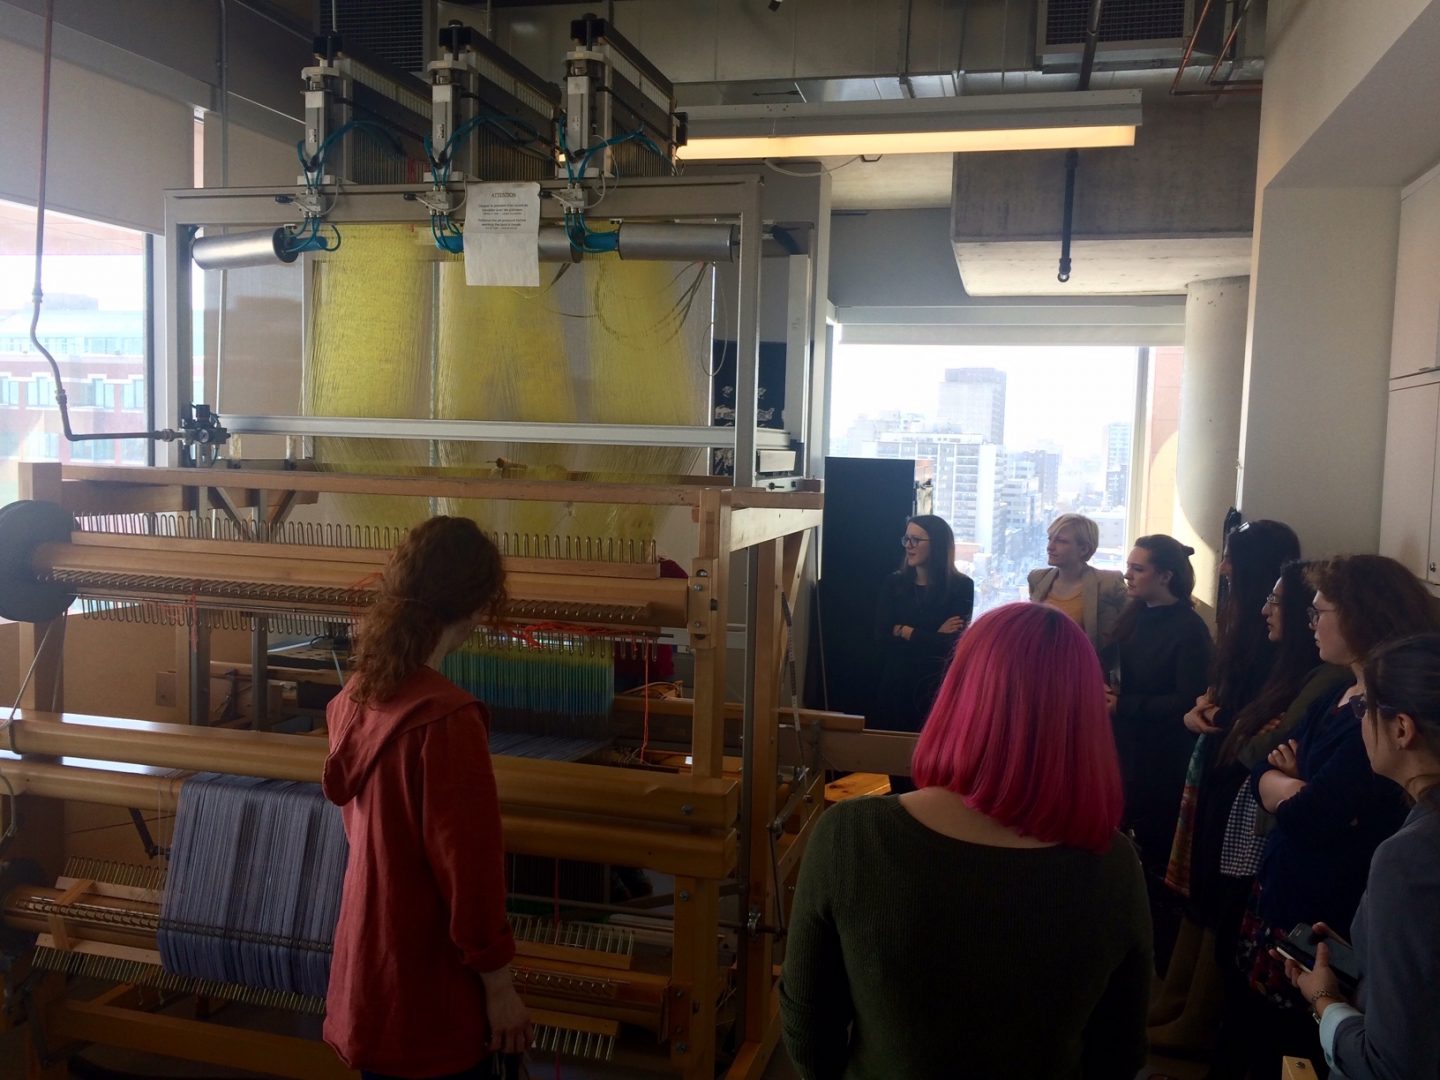 Geneviève Moisan and Claire Nadon demonstrate the Jacquard loom in the Textiles and Materiality Cluster at the Concordia Milieux Institute.